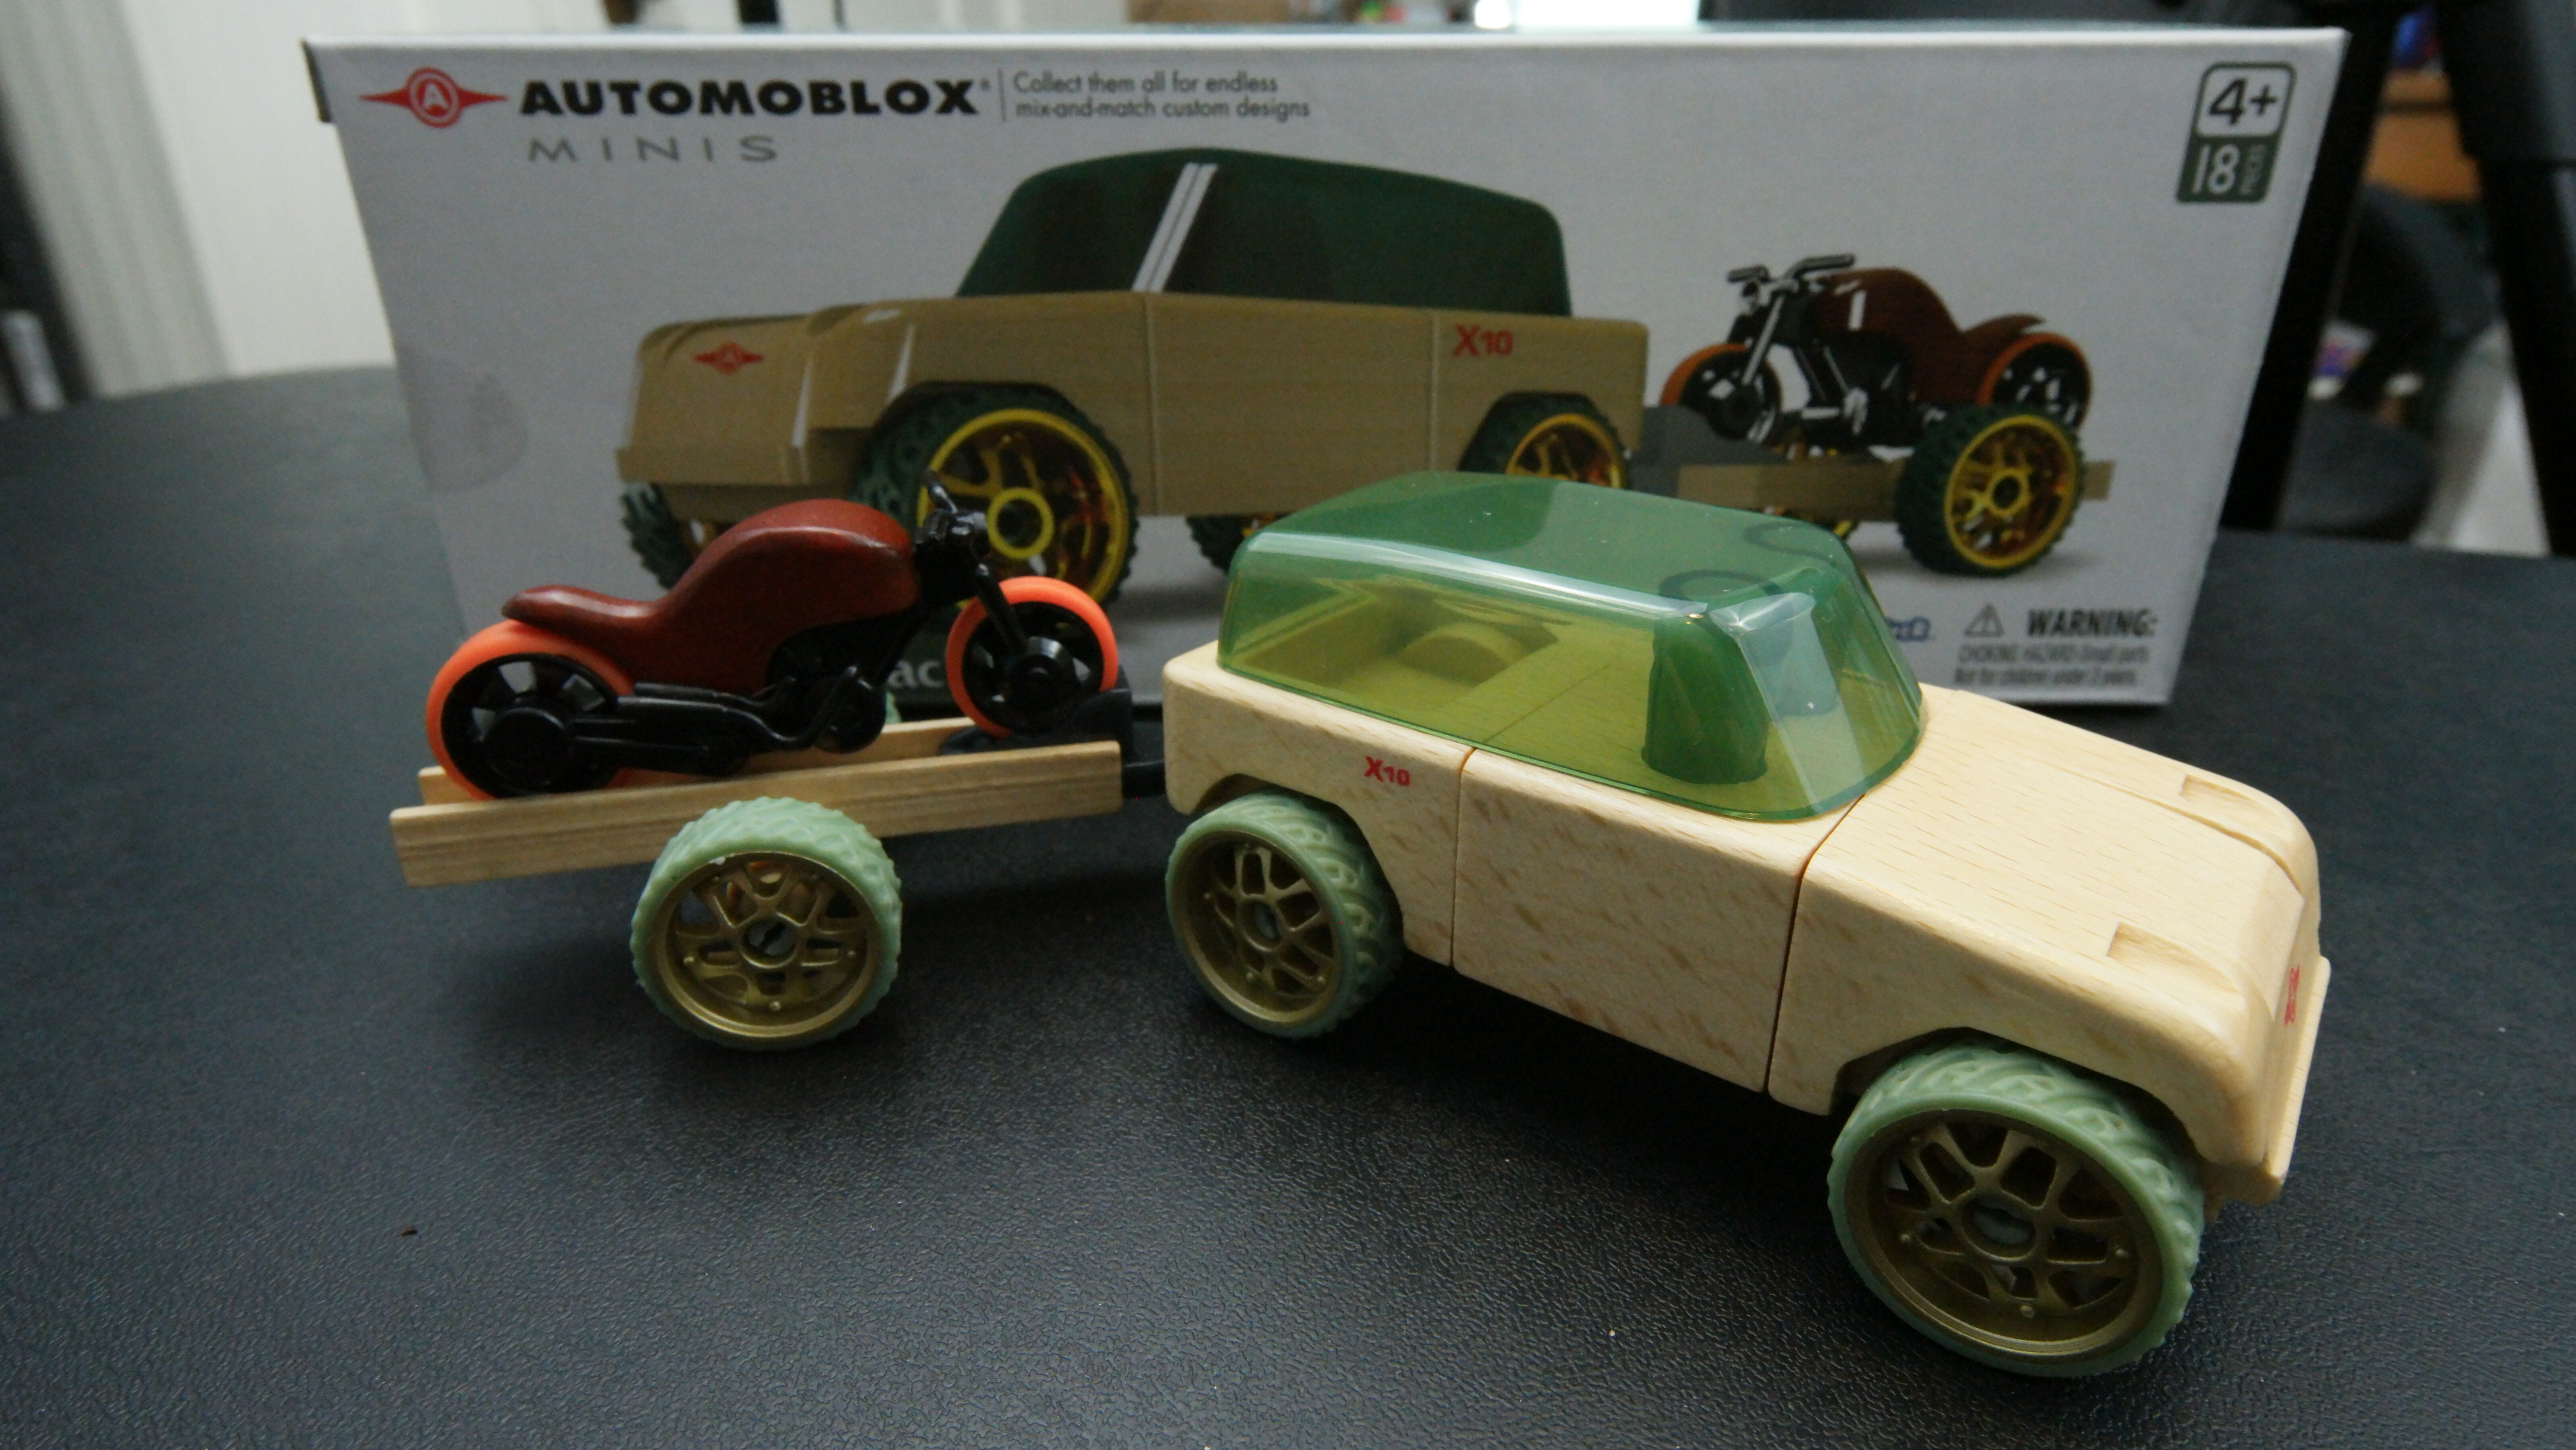 Review: Automoblox Mini X10 Timber Pack & Chaos and HR5 Scorch 2-Pack